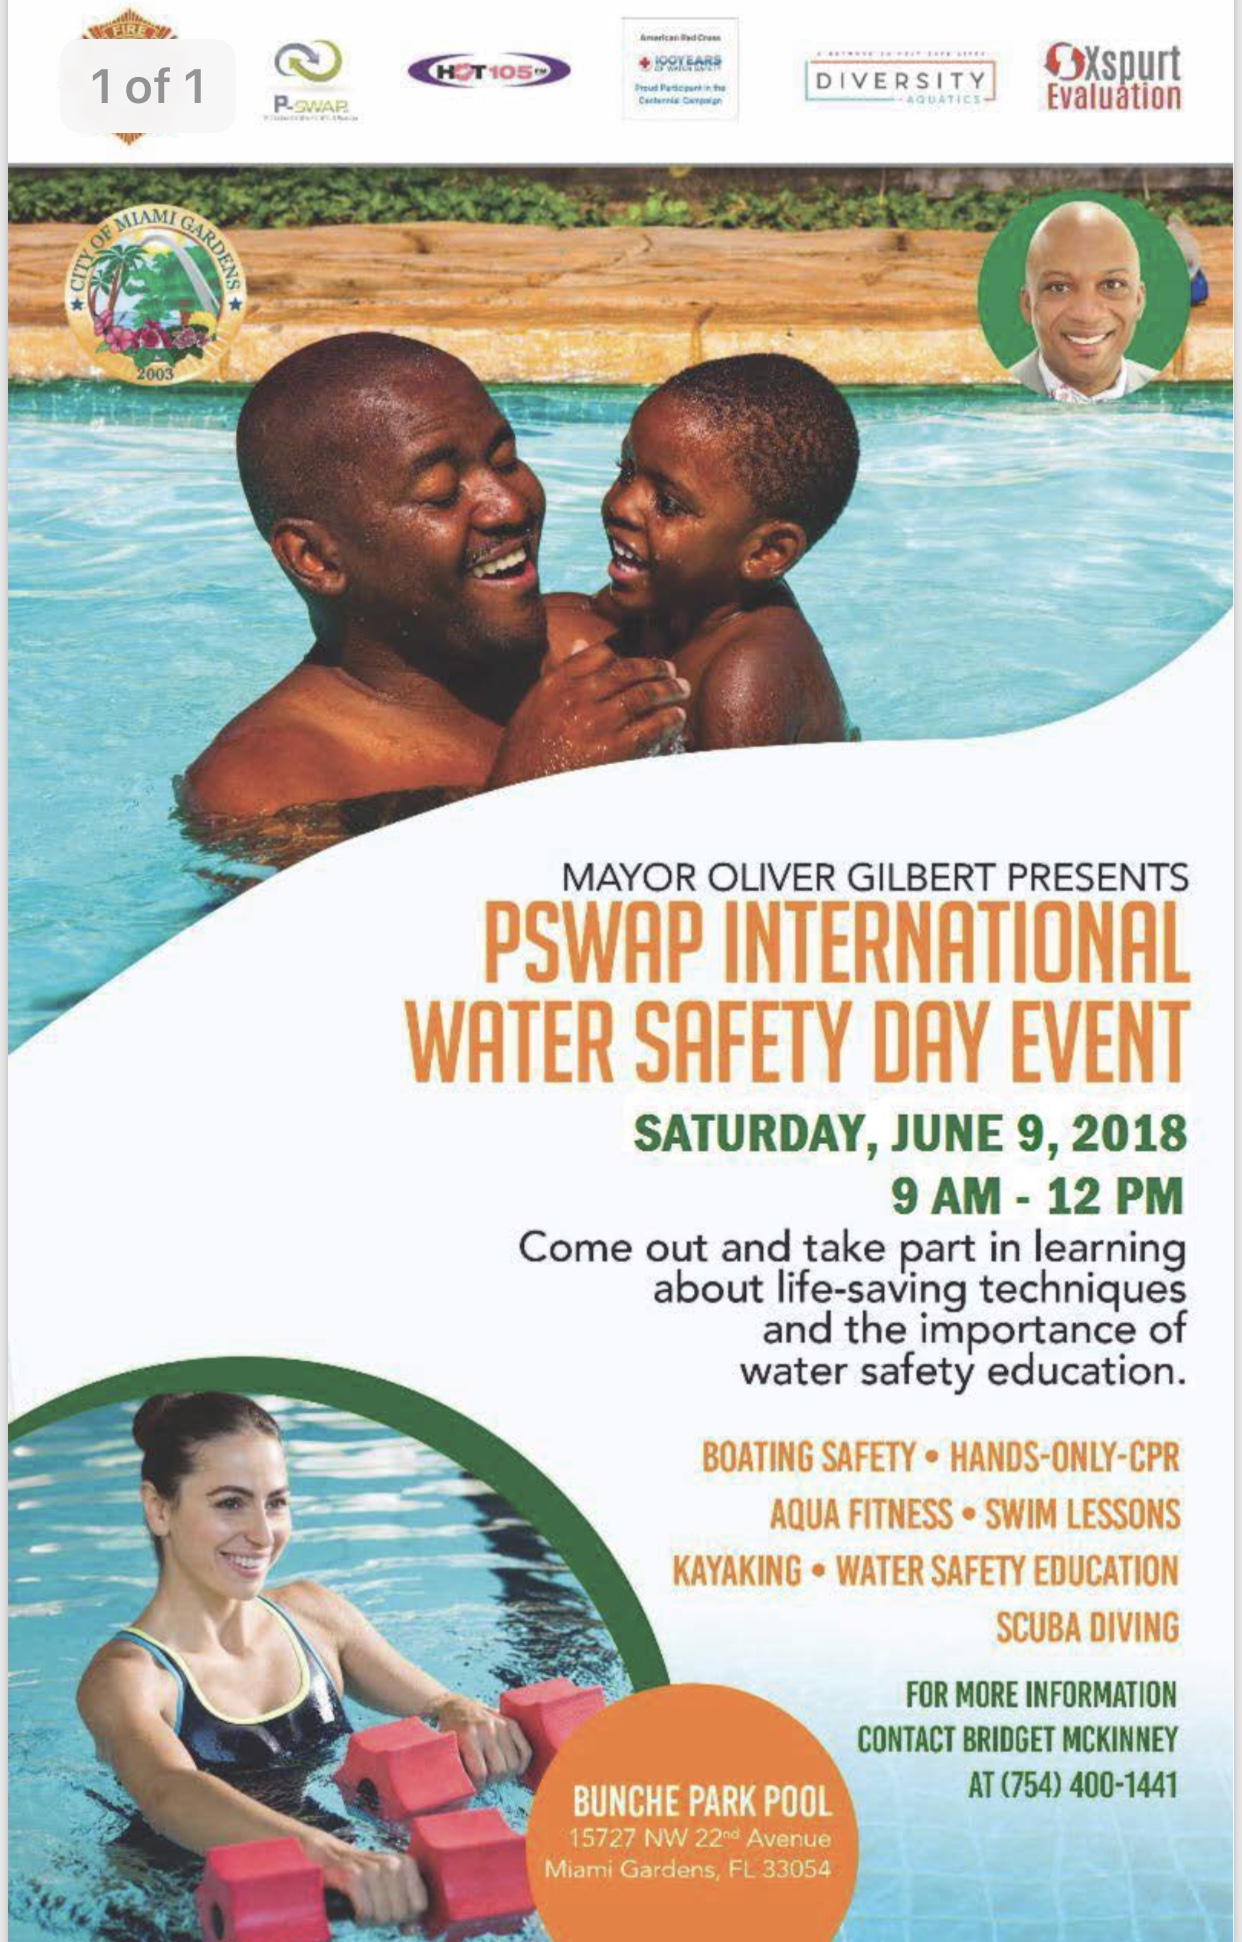 The City of Miami Gardens, PSWAP, & American Red Cross are Hosting an International Water Safety Day Event Saturday, May 26th, 2018 at Bunche Park Pool. Water Safety Day spreads awareness of ongoing global drowning pandemic and importance of water safety education! Through our network of educators, youth leaders, and volunteers, we will be able to reach exponentially more people.